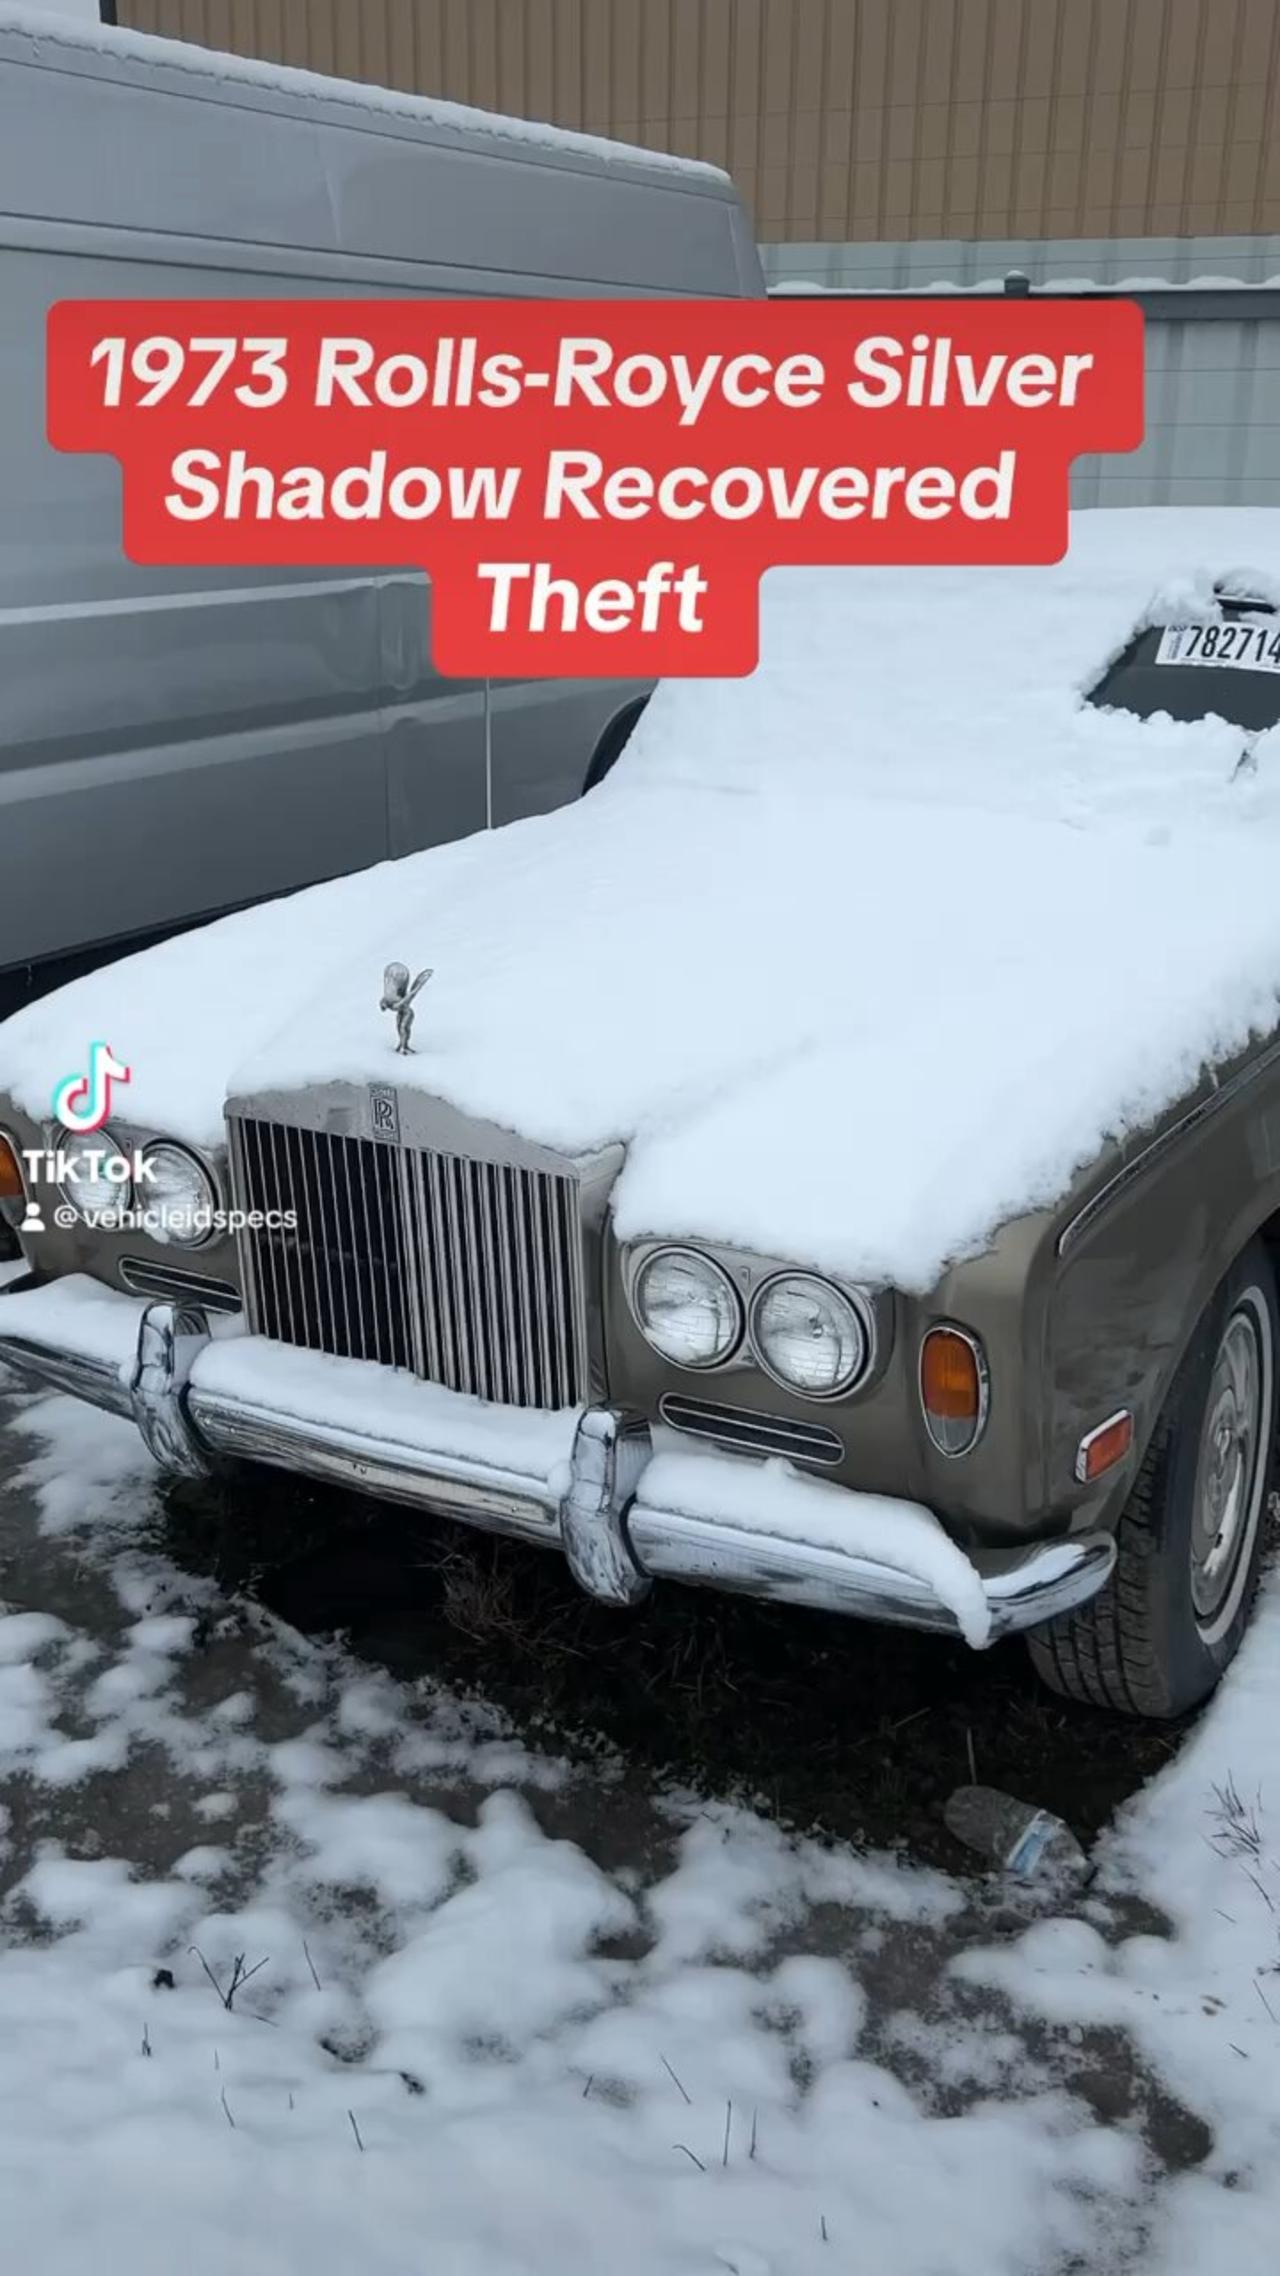 1973 Rolls-Royce Silver Shadow recovered theft